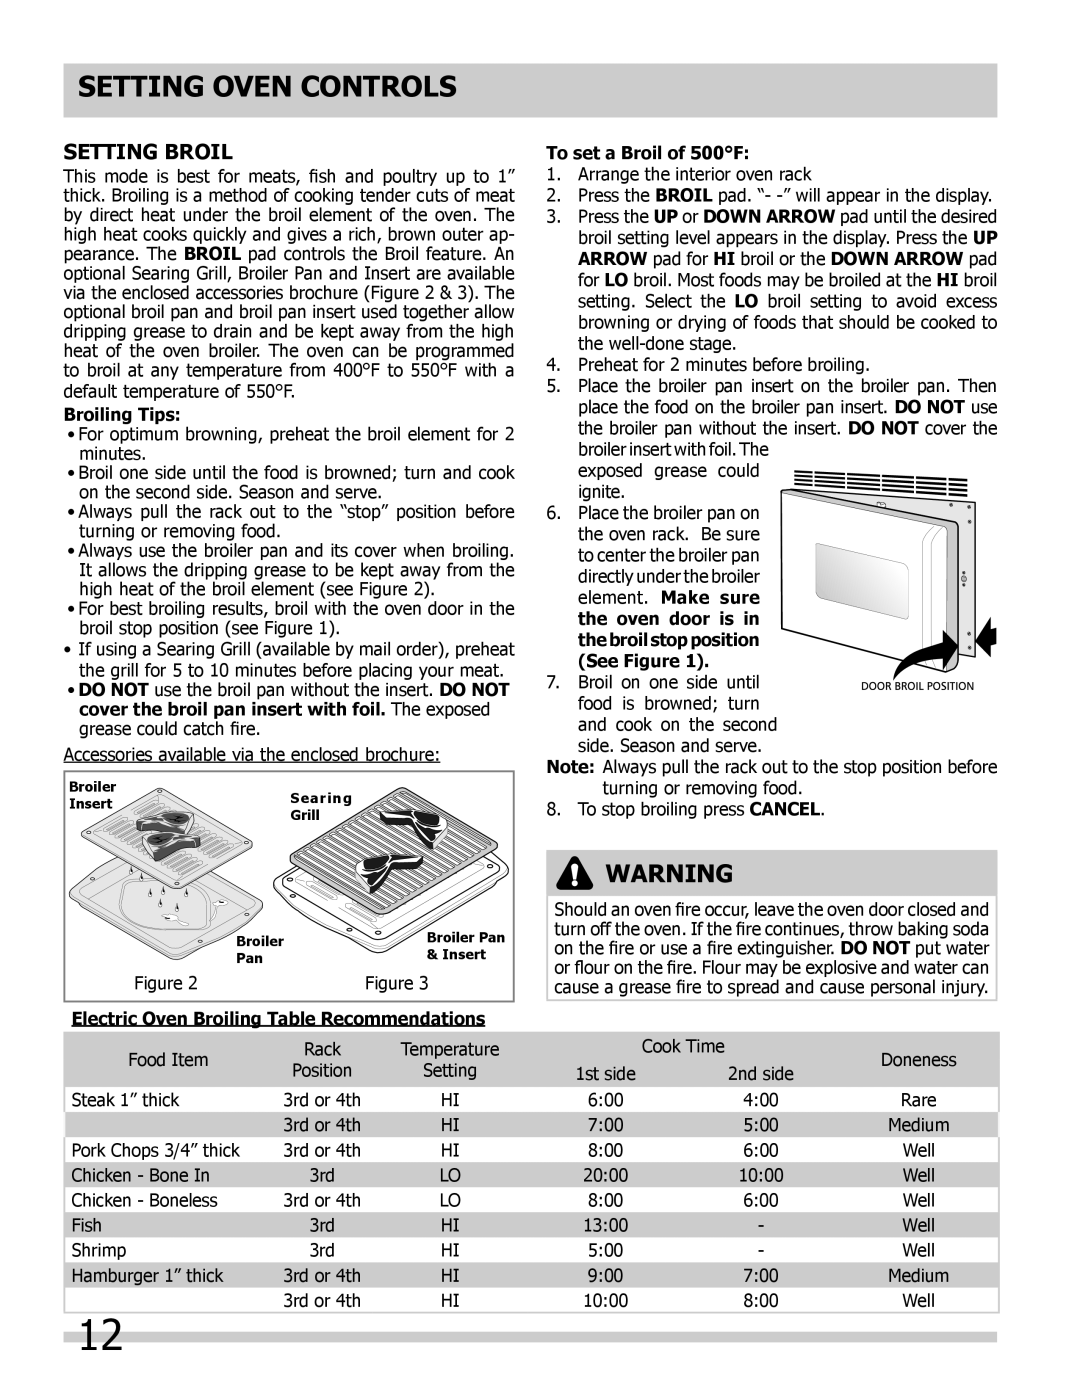 Frigidaire 318205325 Setting Broil, Broiling Tips, Electric Oven Broiling Table Recommendations, To set a Broil of 500F 